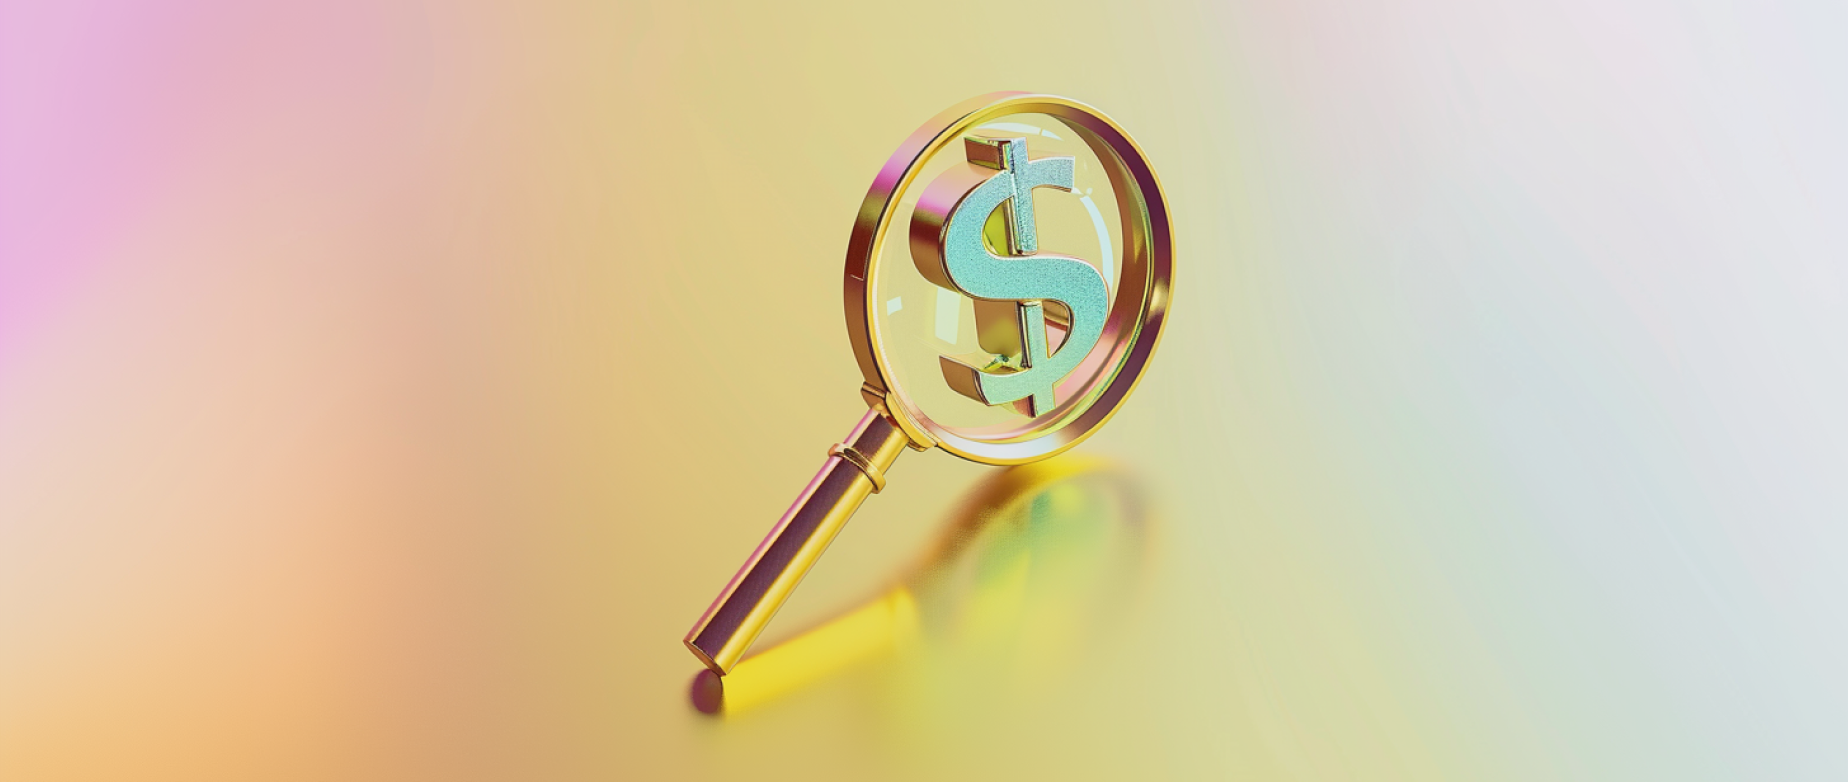 a magnifying glass with a money sign representing solvency